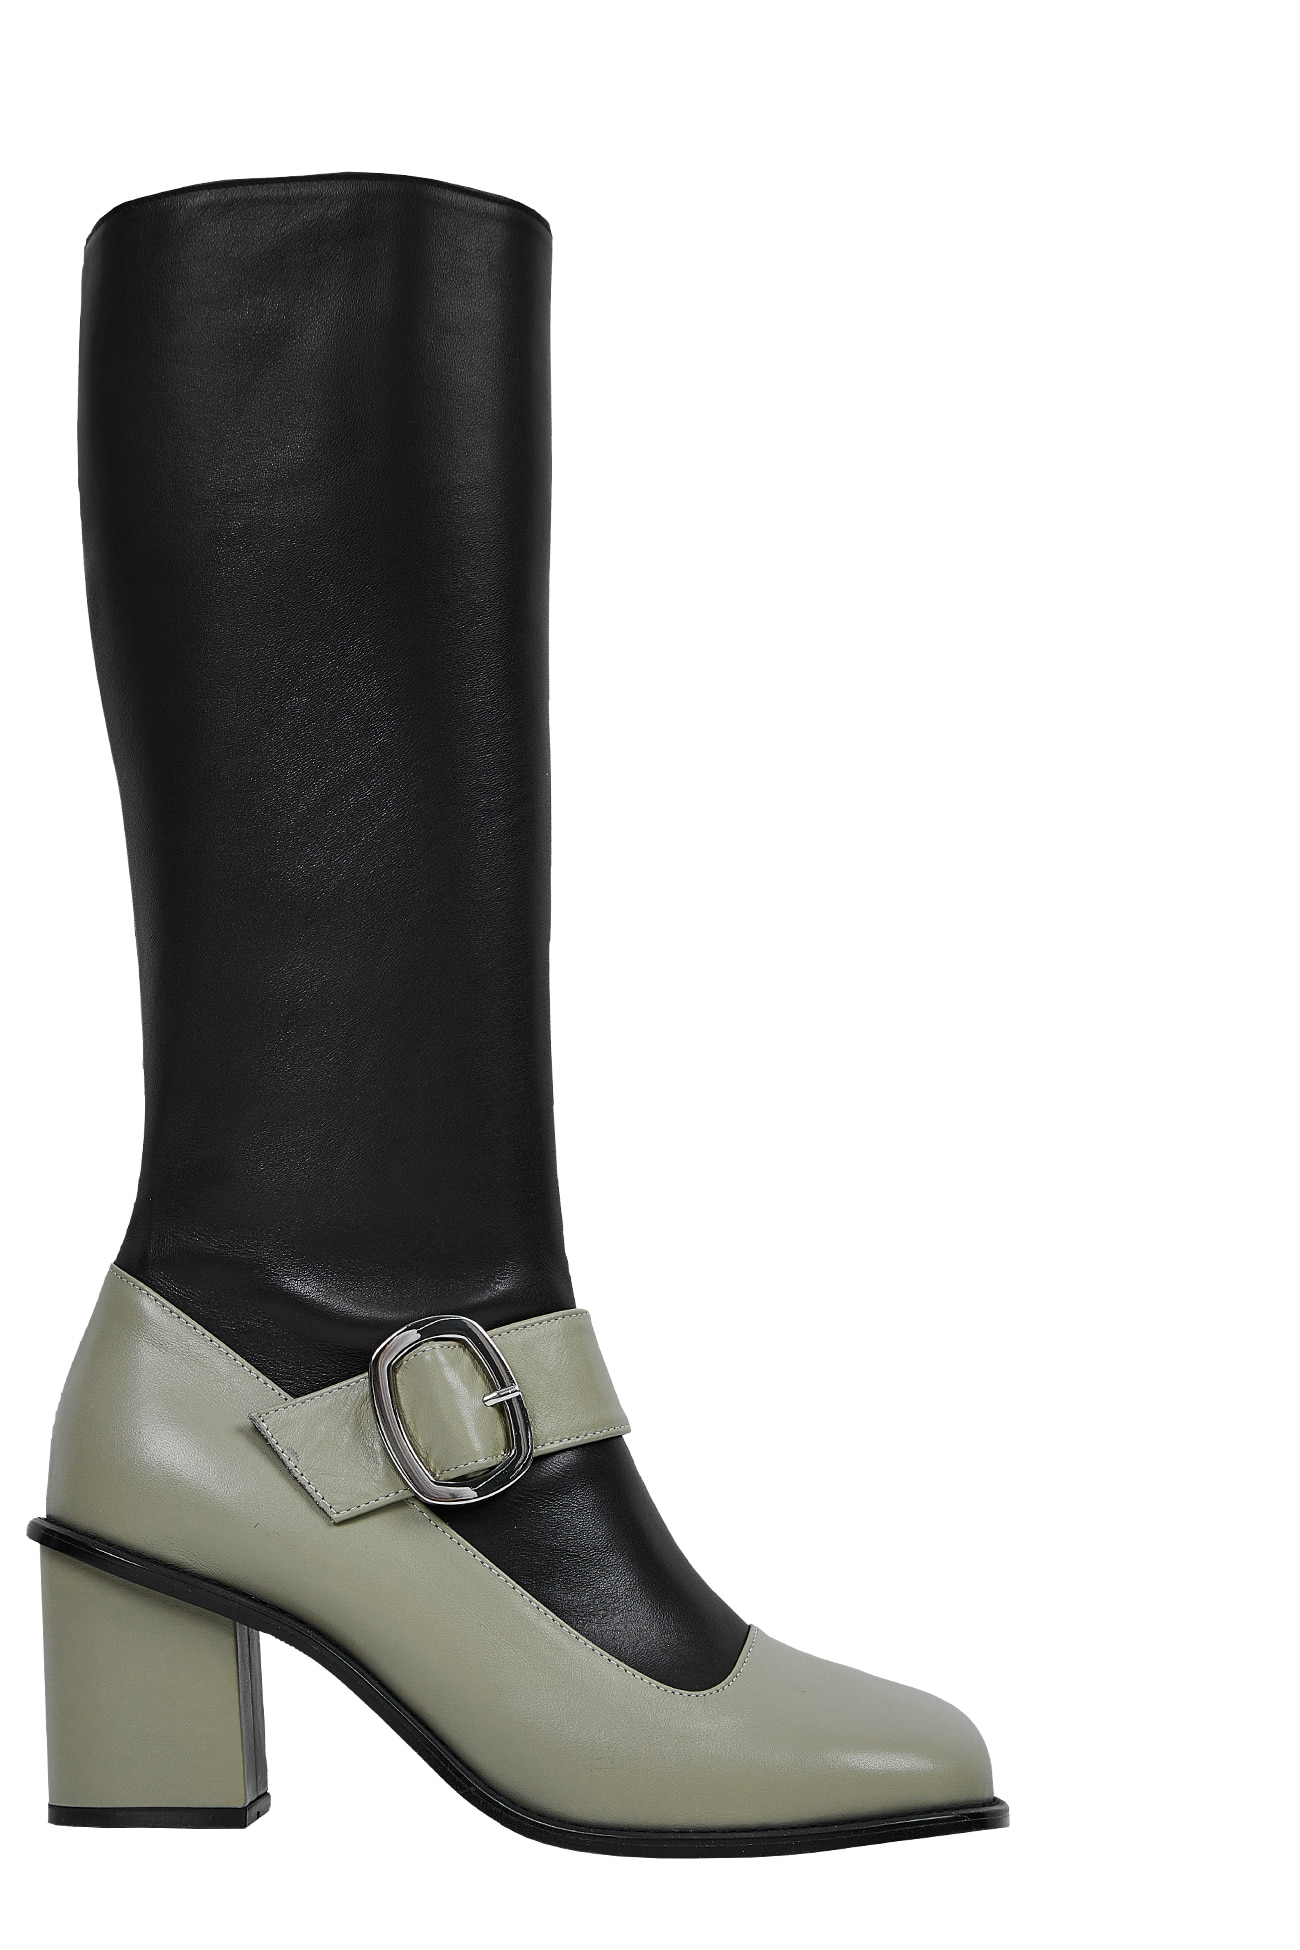 CONTRAST BUCKLE BOOTS / BLACK, 세릭